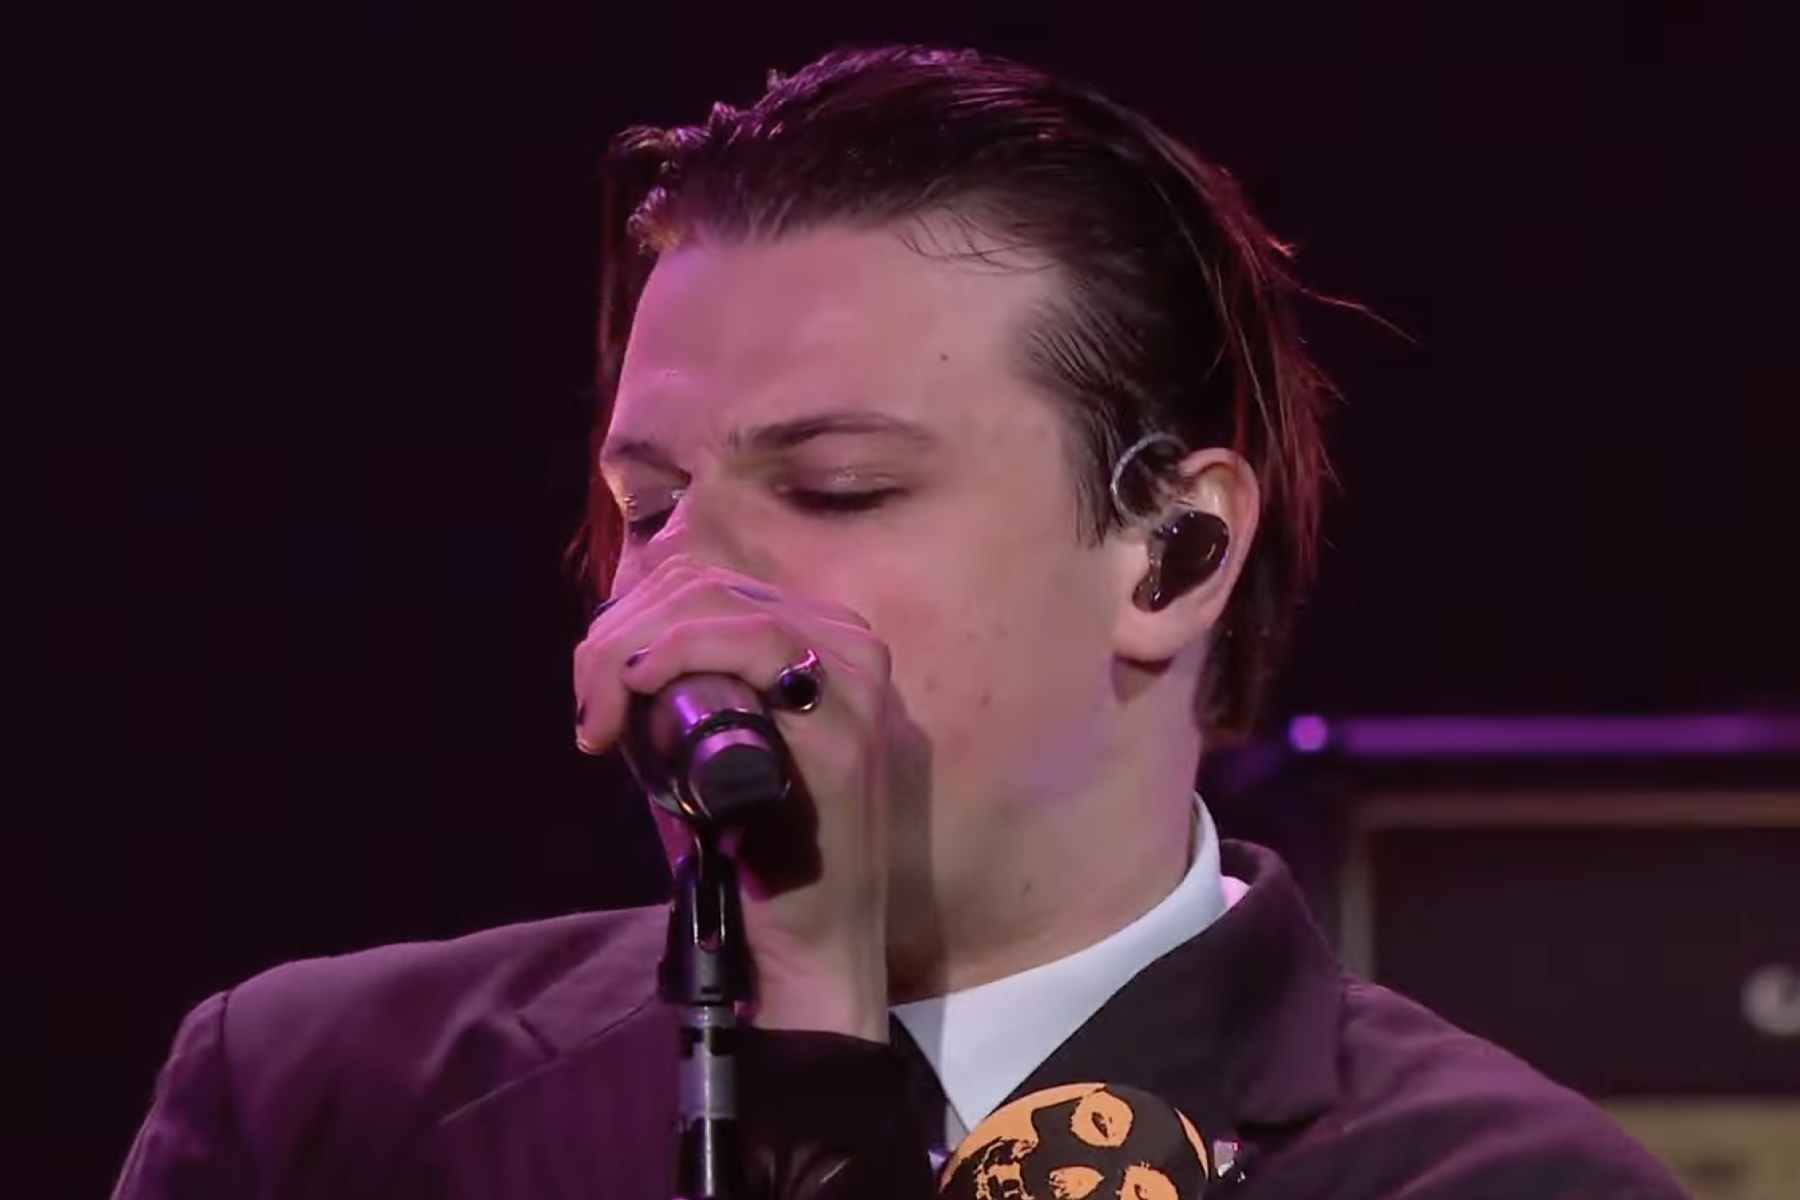 Yungblud Delivers a High-Octane Performance on ‘The Funeral’ in ‘Corden.